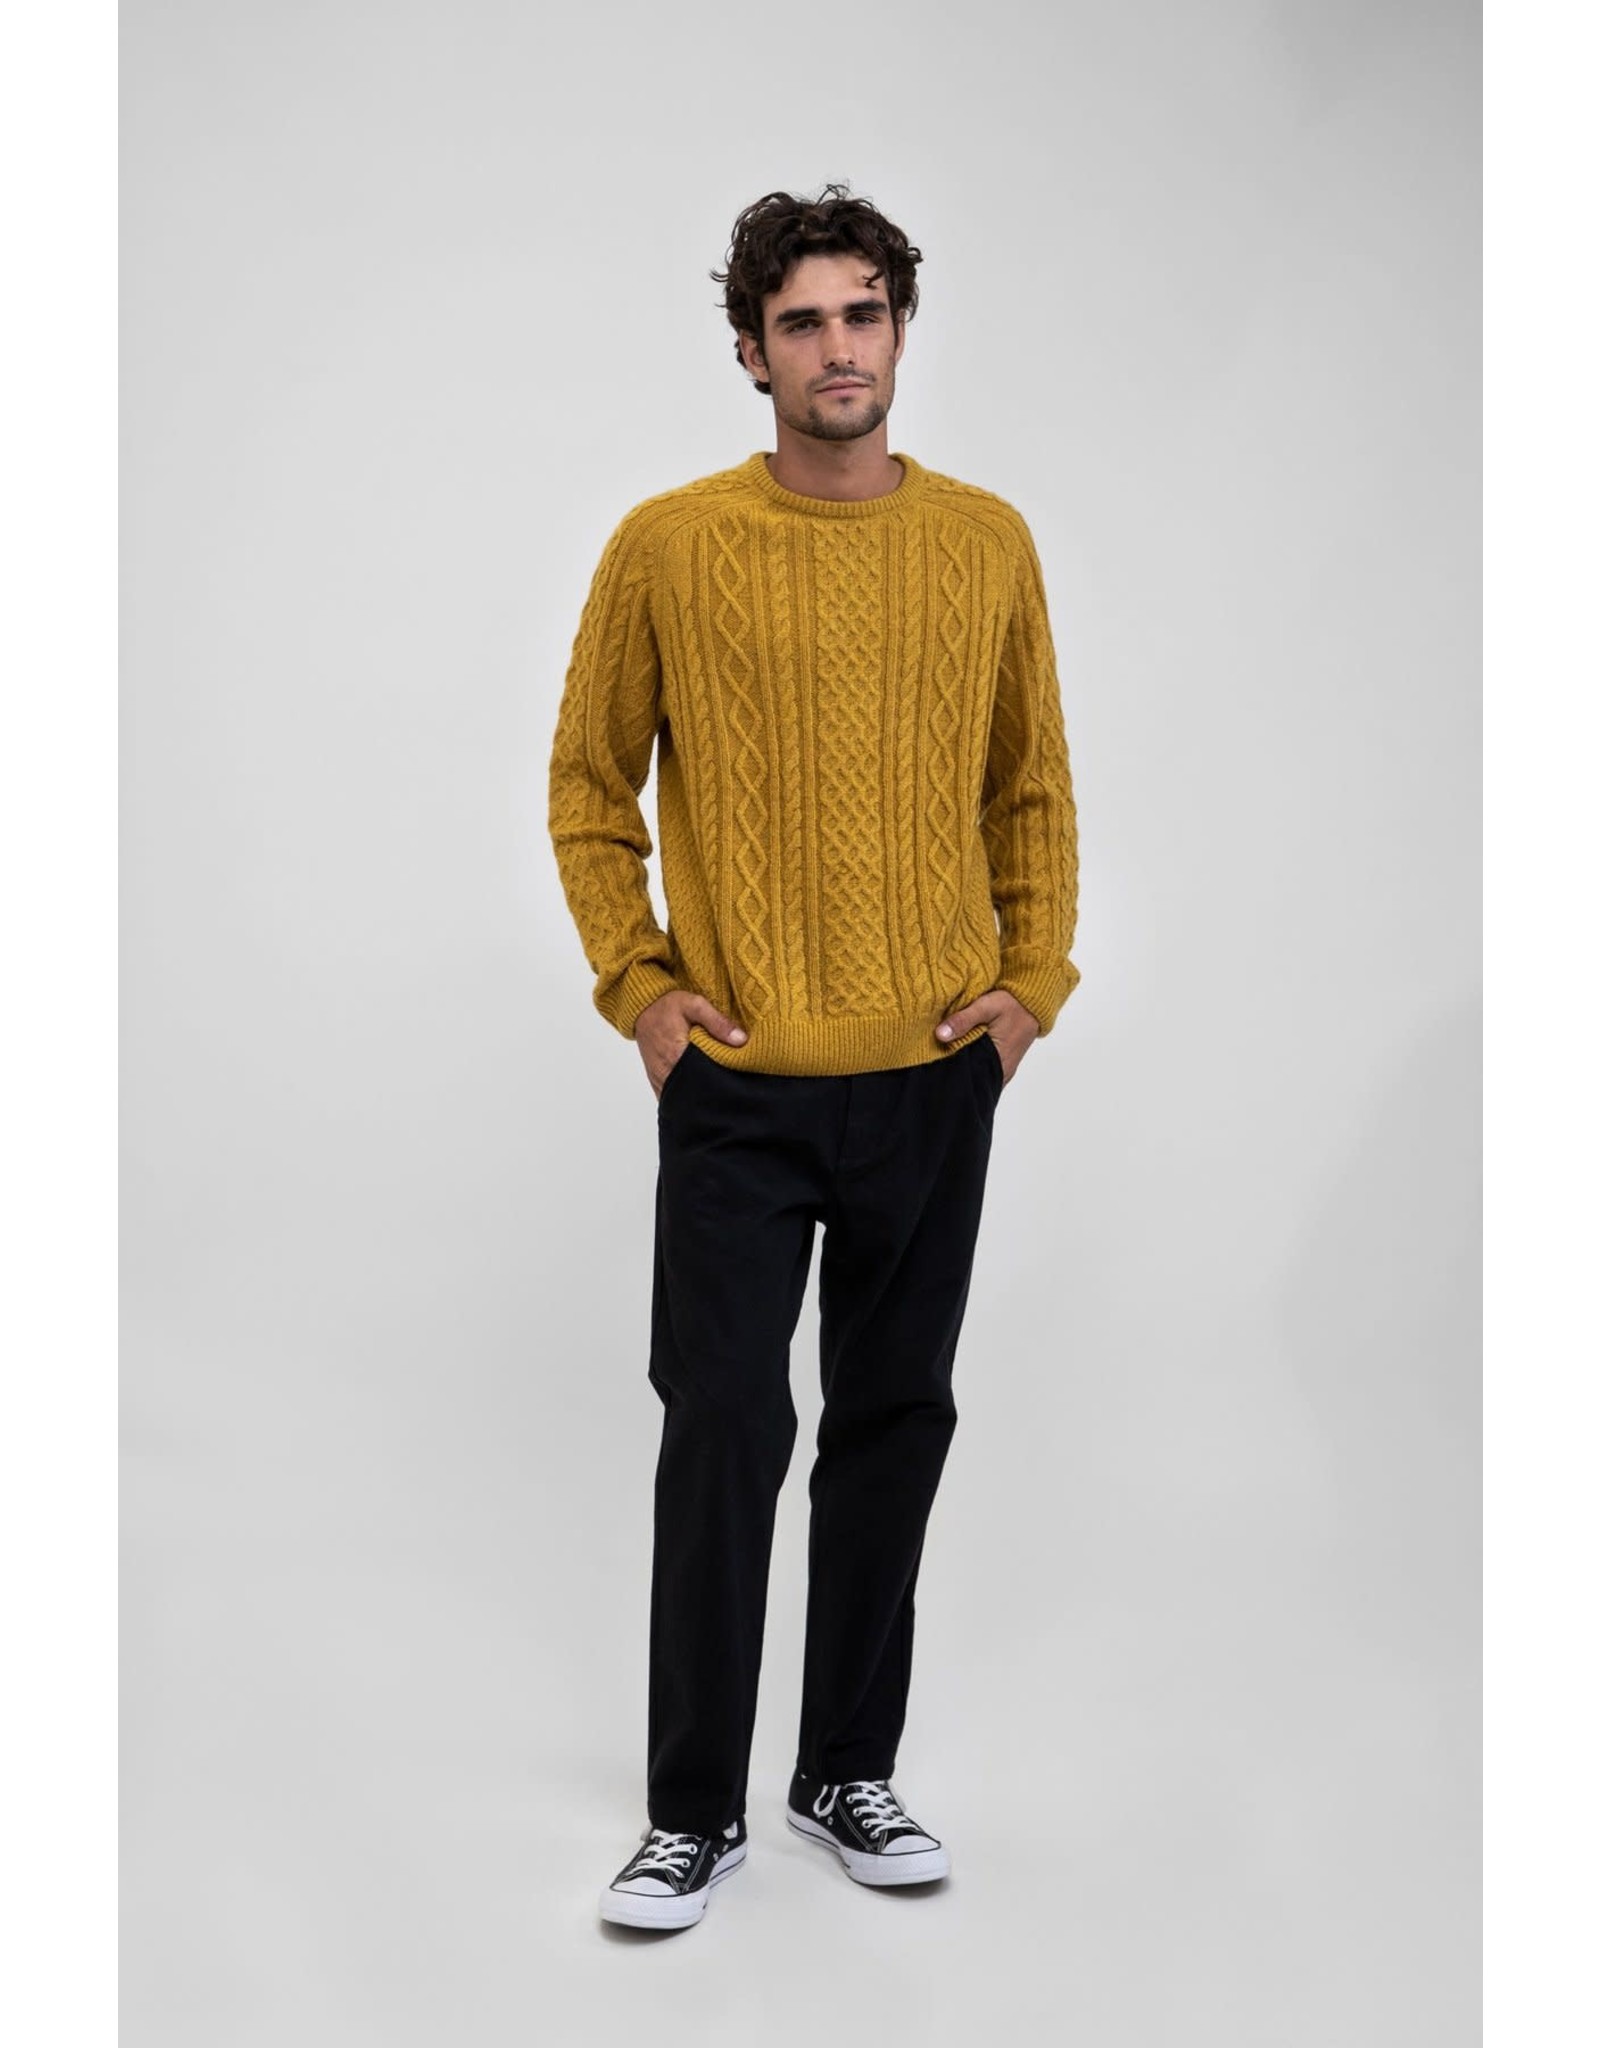 Biscuit General Store RHM - Cove Sweater / Blue or Gold